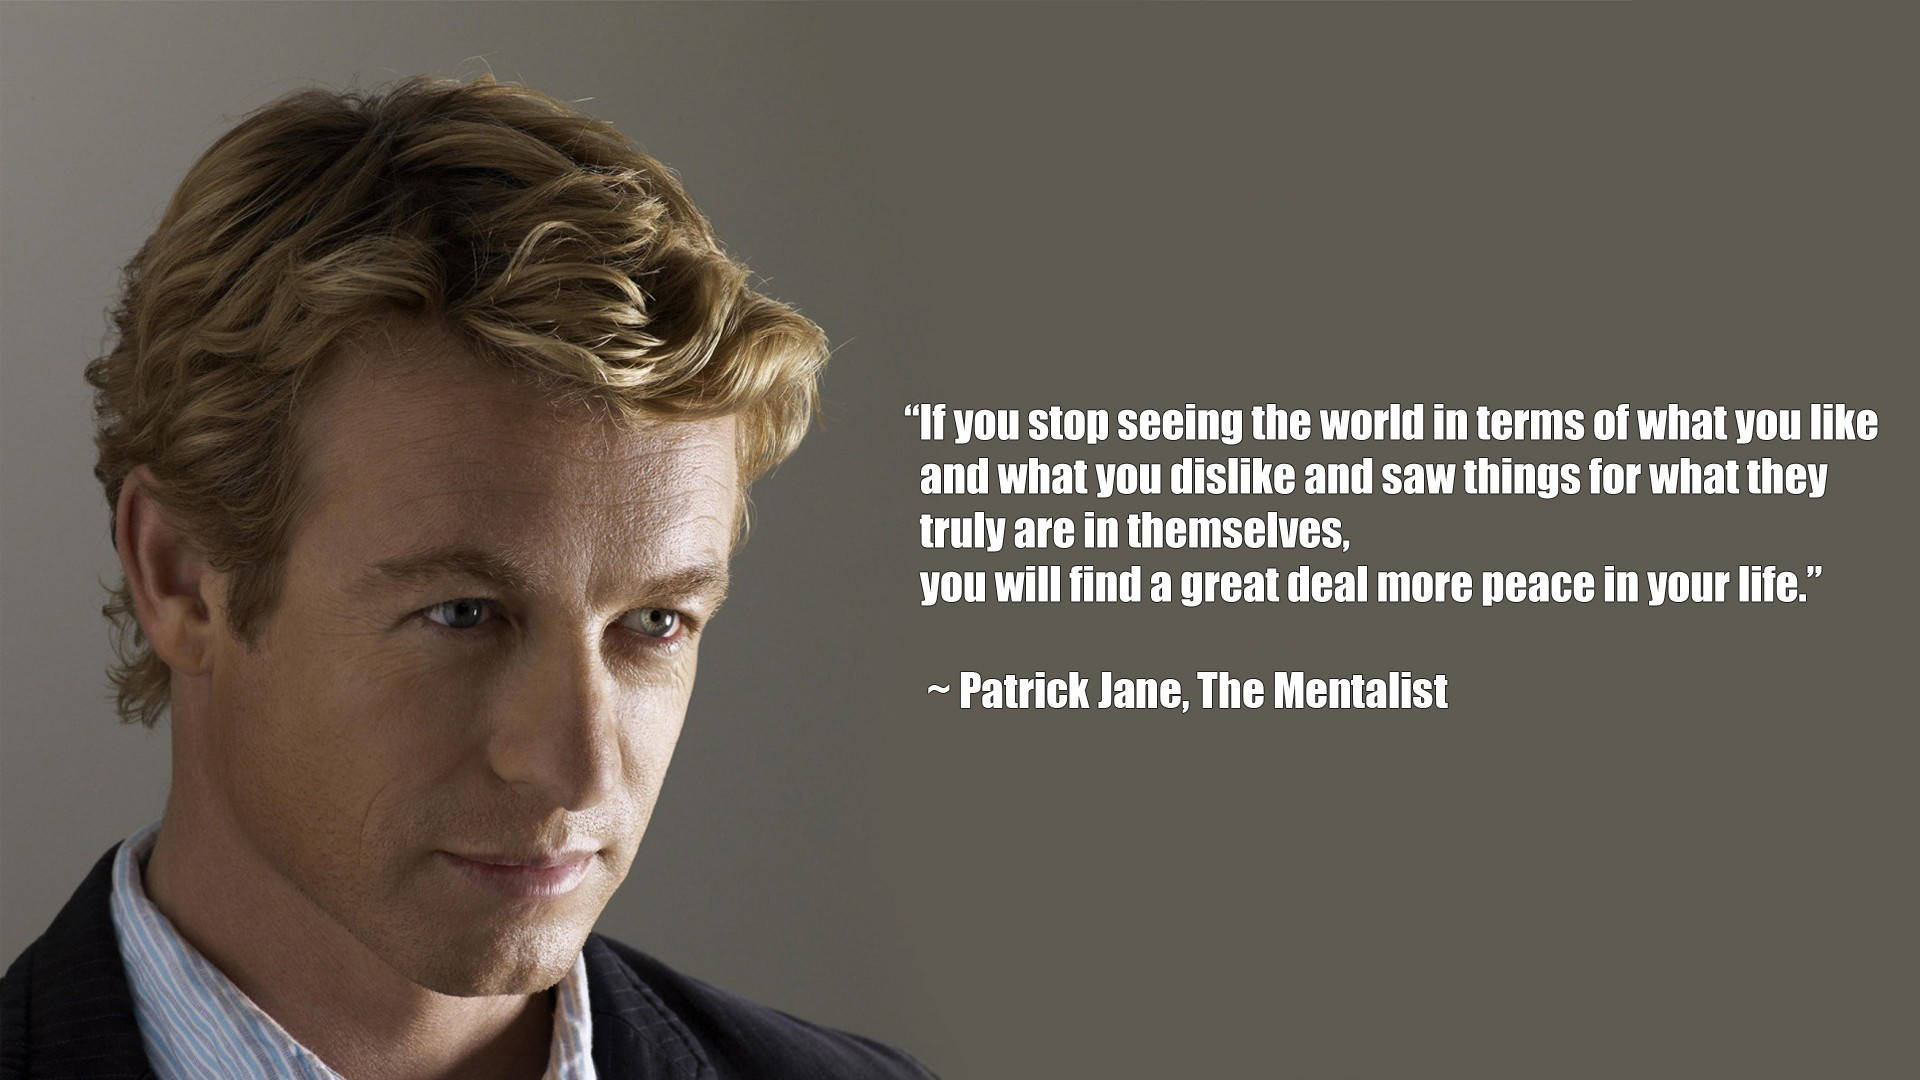 The Mentalist Quote By Patrick Jane Background